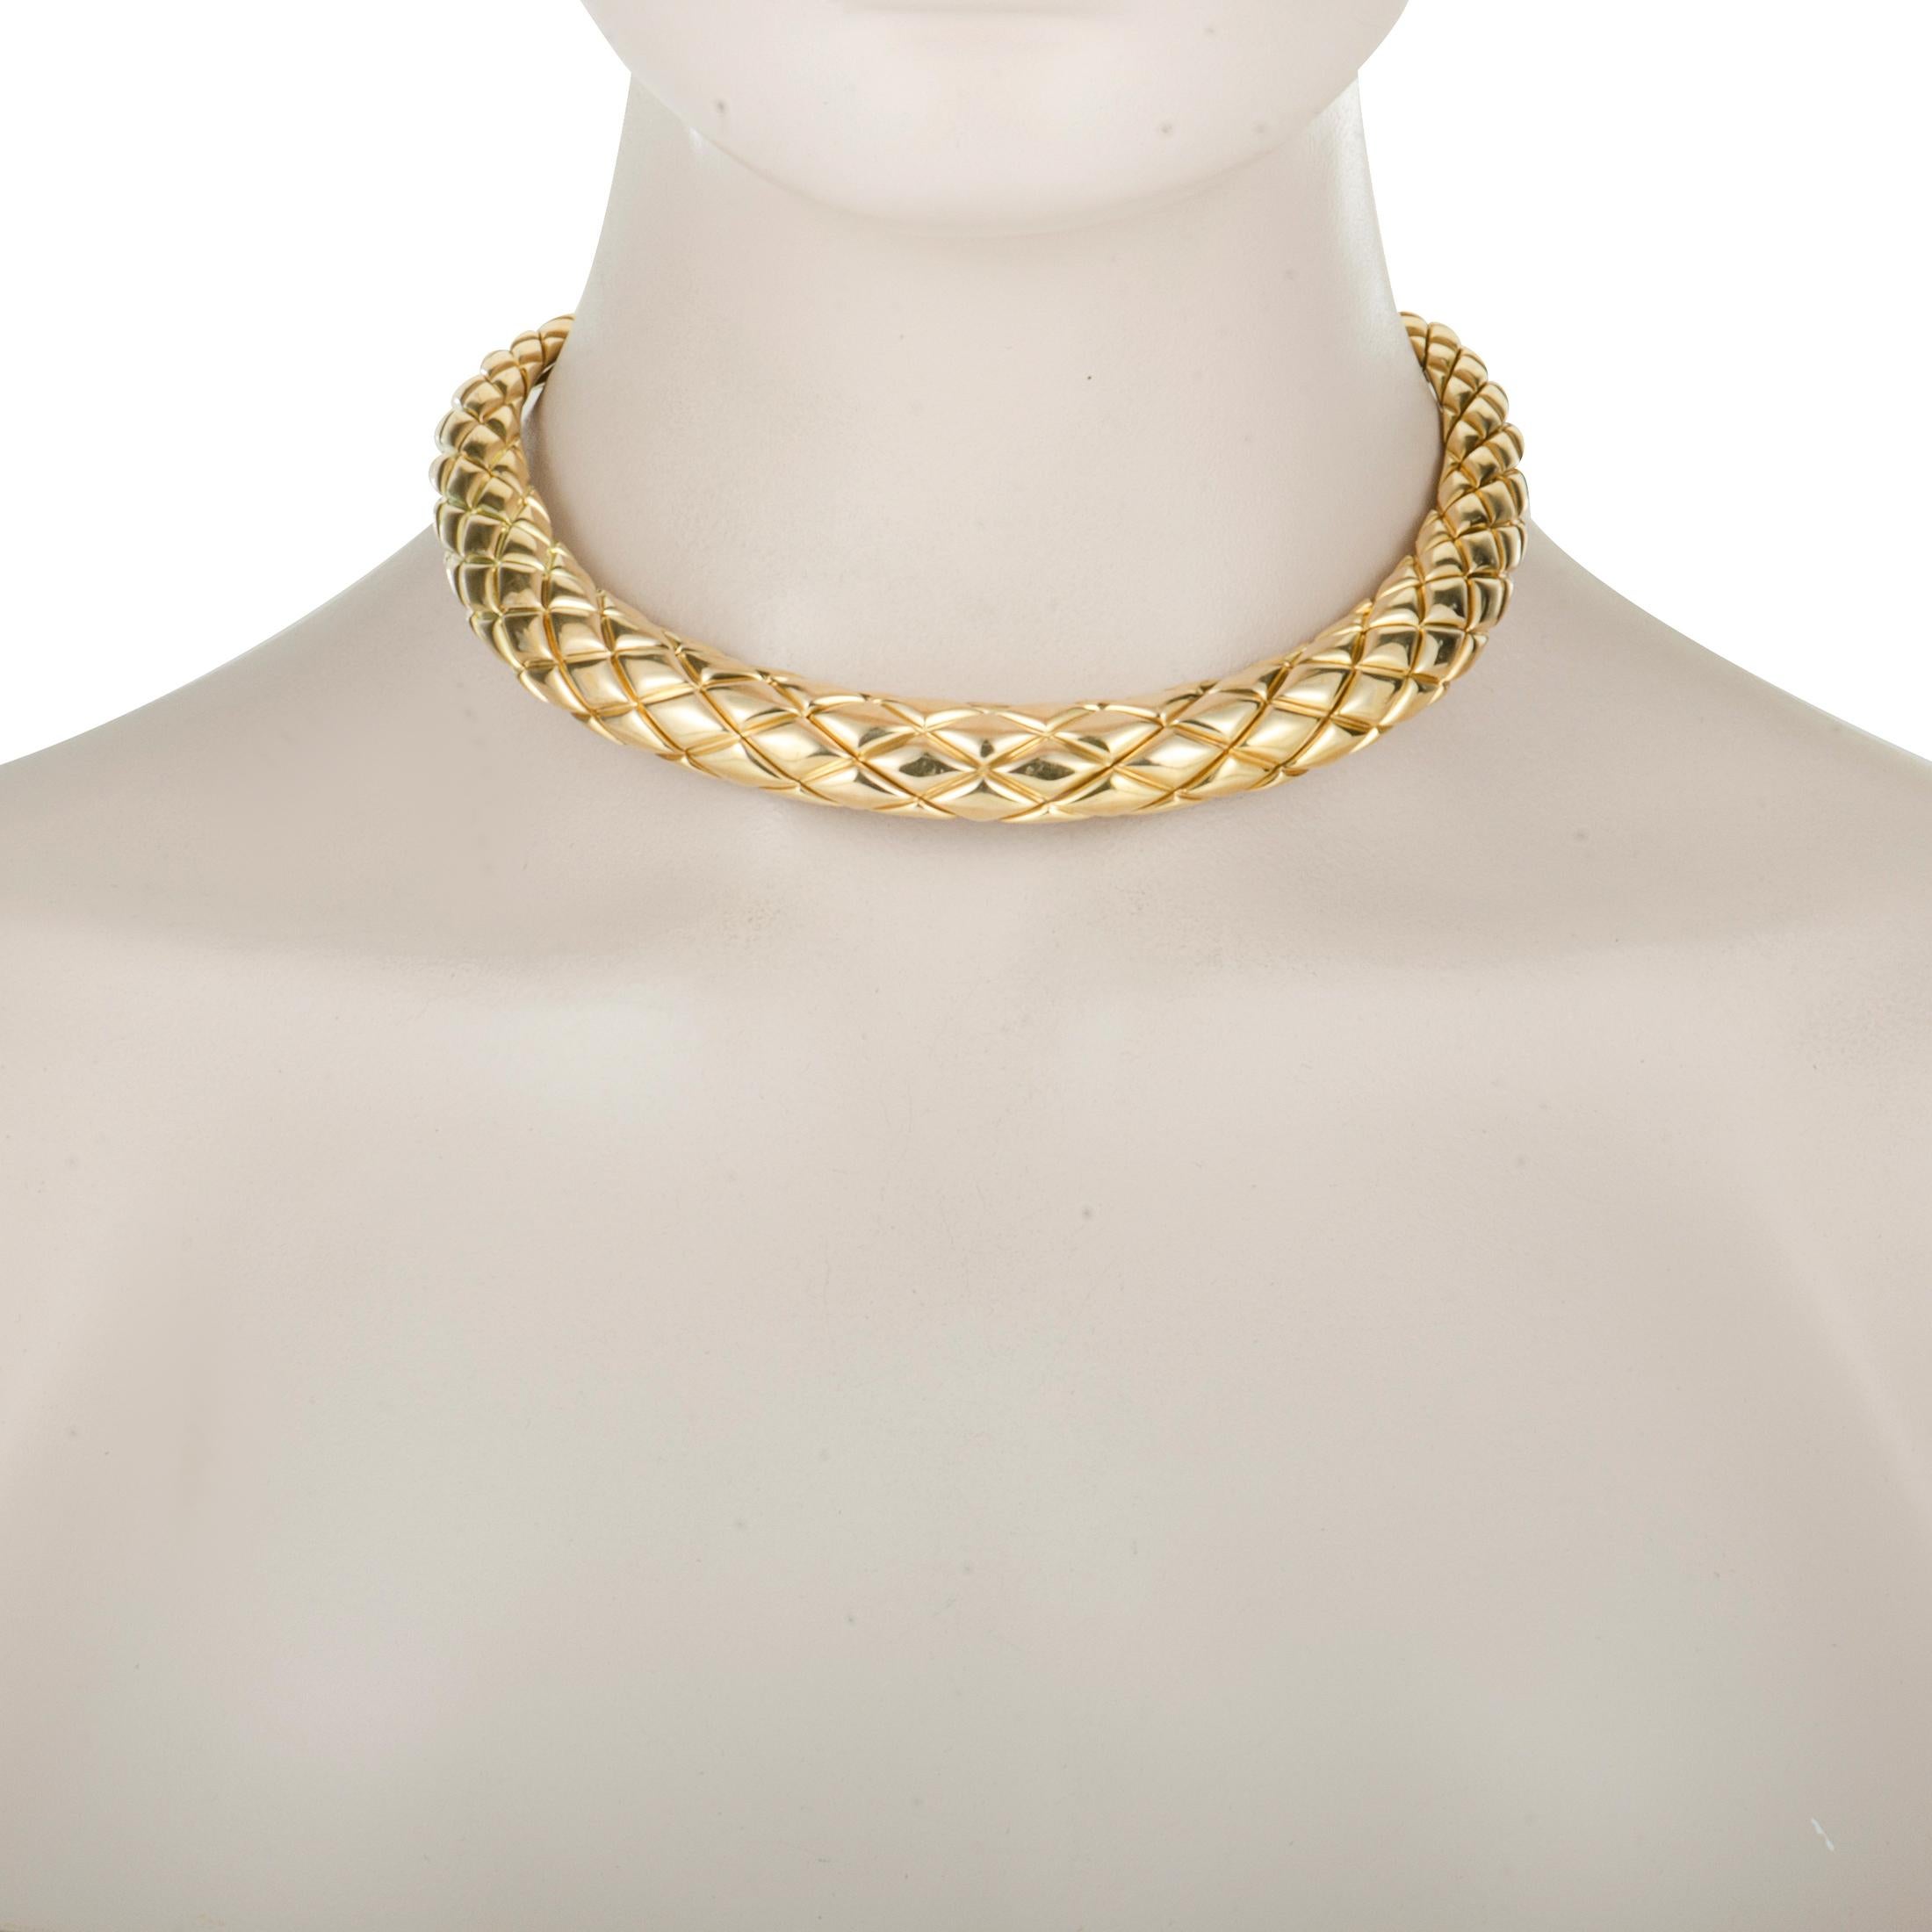 Prestigious 18K yellow gold is elegantly molded to craft this beautiful necklace by Chaumet that is a stunning embodiment of grace. The chic necklace can be perfectly paired with your equally classy outfits.

